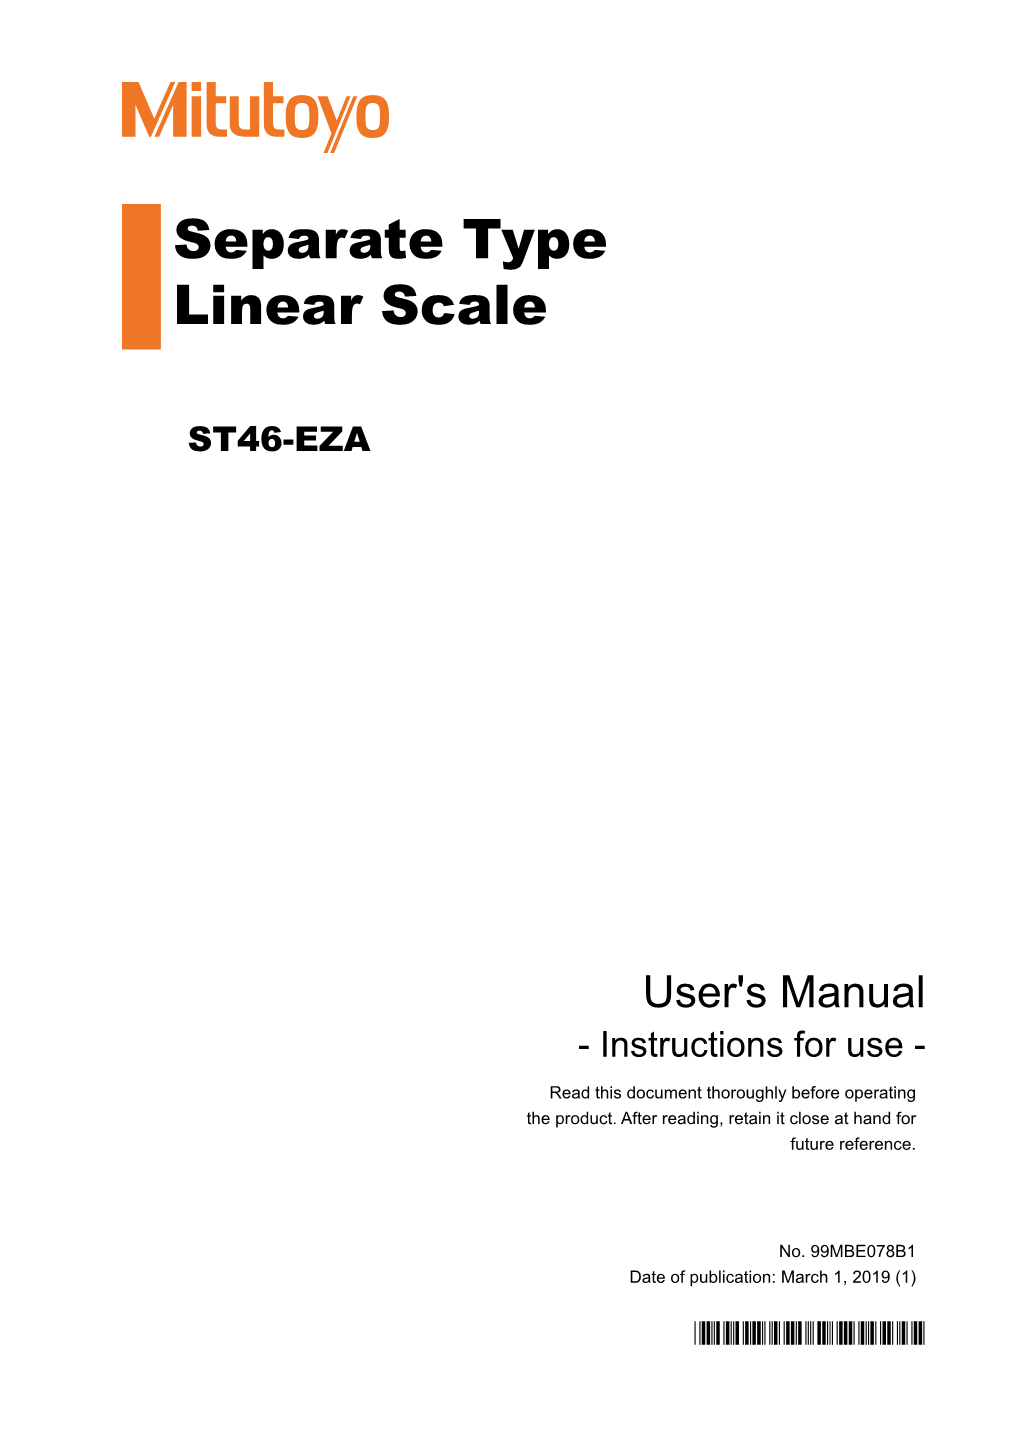 Separate Type Linear Scale